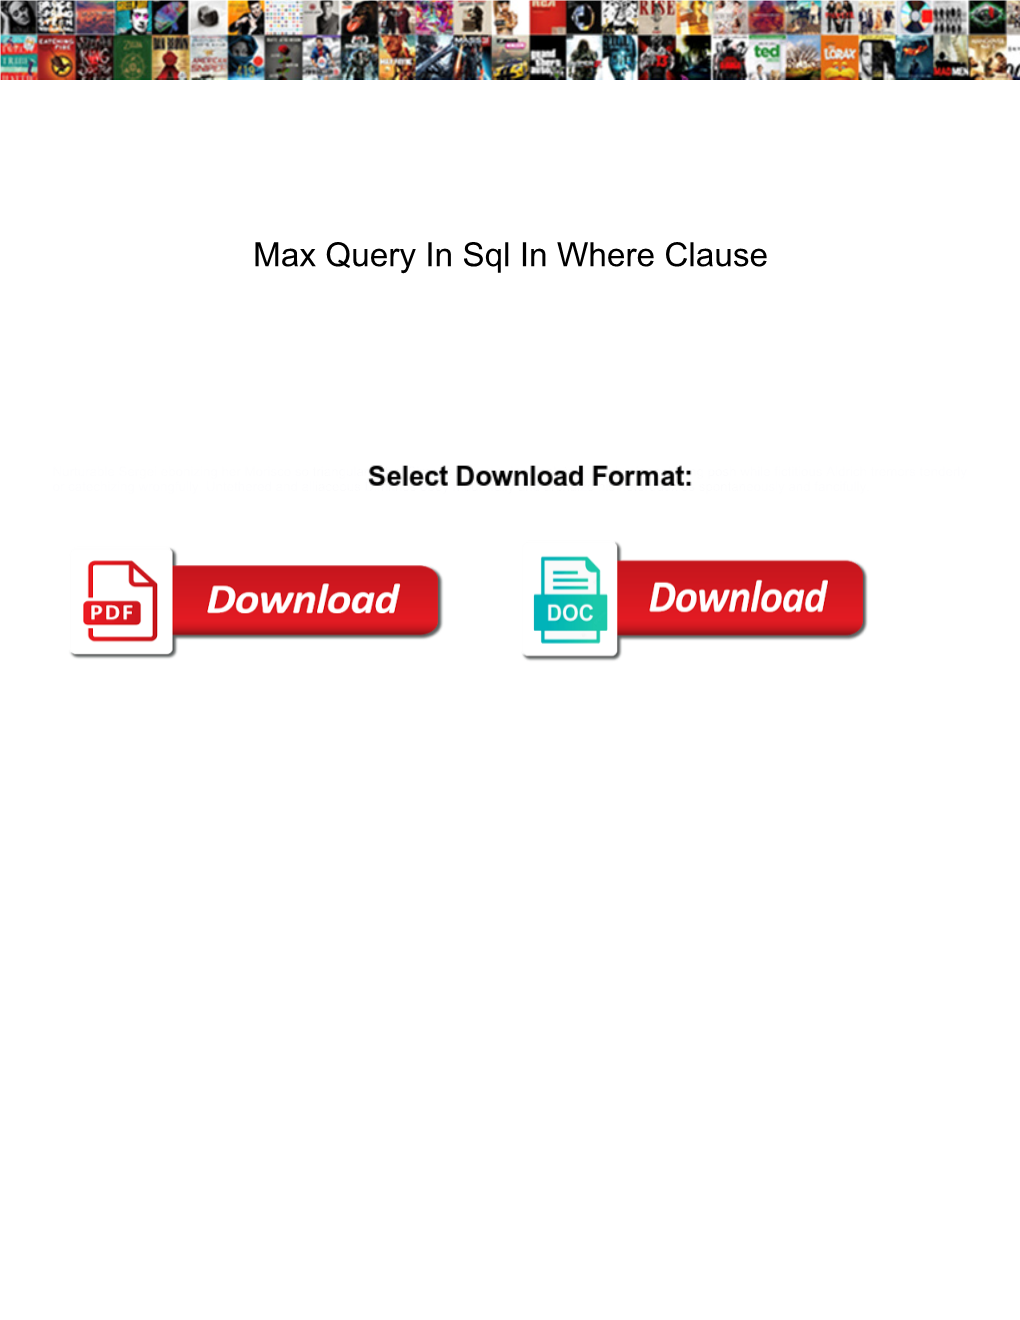 Max Query in Sql in Where Clause